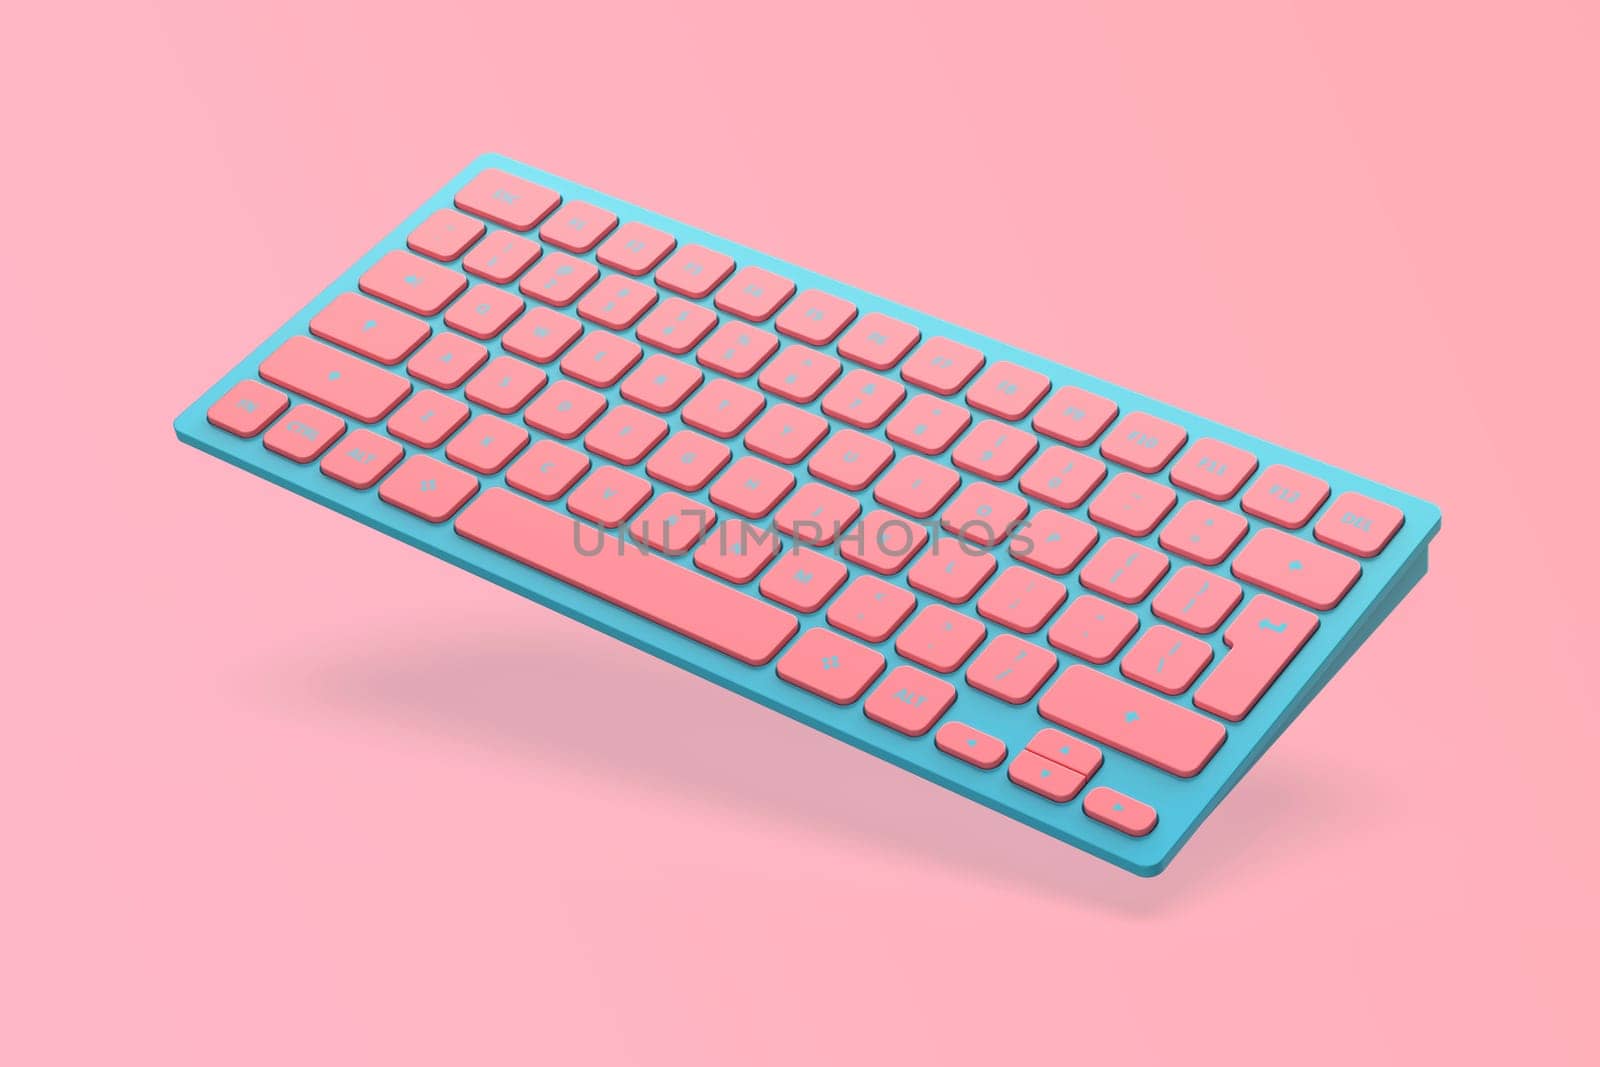 Blue wireless computer keyboard with pink keys on pink background